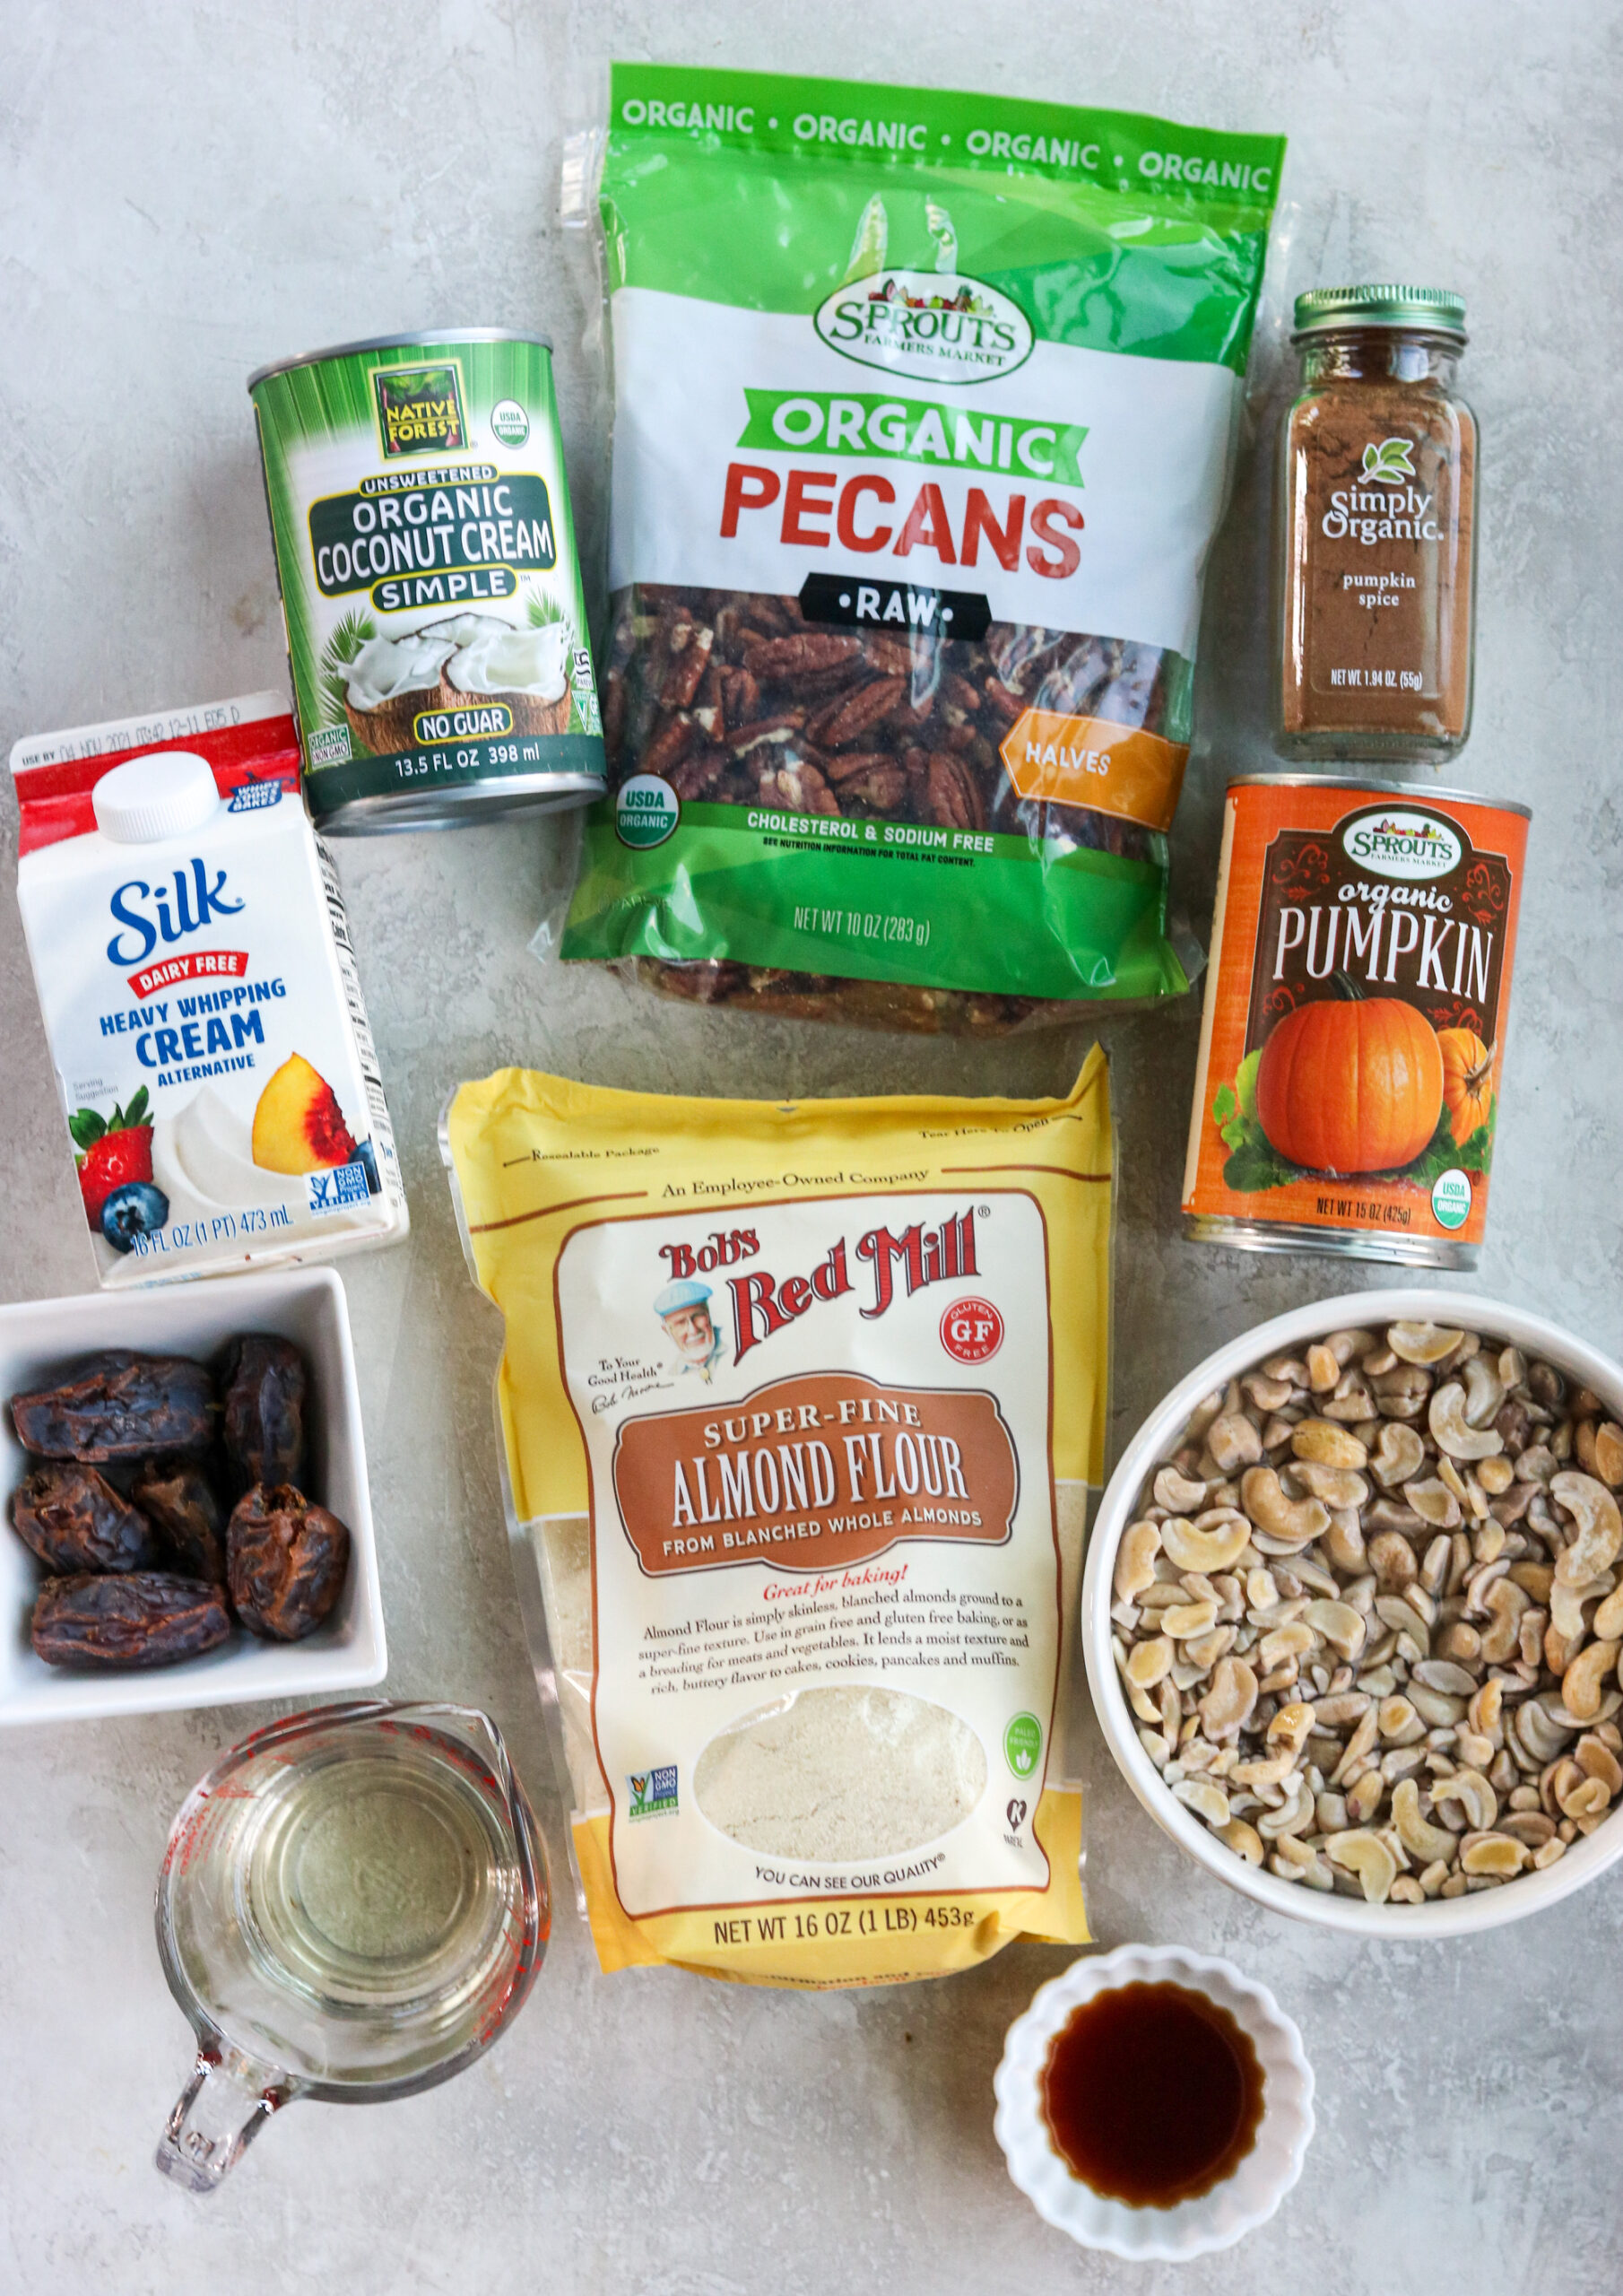 all the ingredients to make the bars: coconut cream, dairy free whipping cream, pitted dates, almond flour, cashews, canned pumpkin, raw pecans, pumpkin pie spice, coconut oil, and vanilla extract.